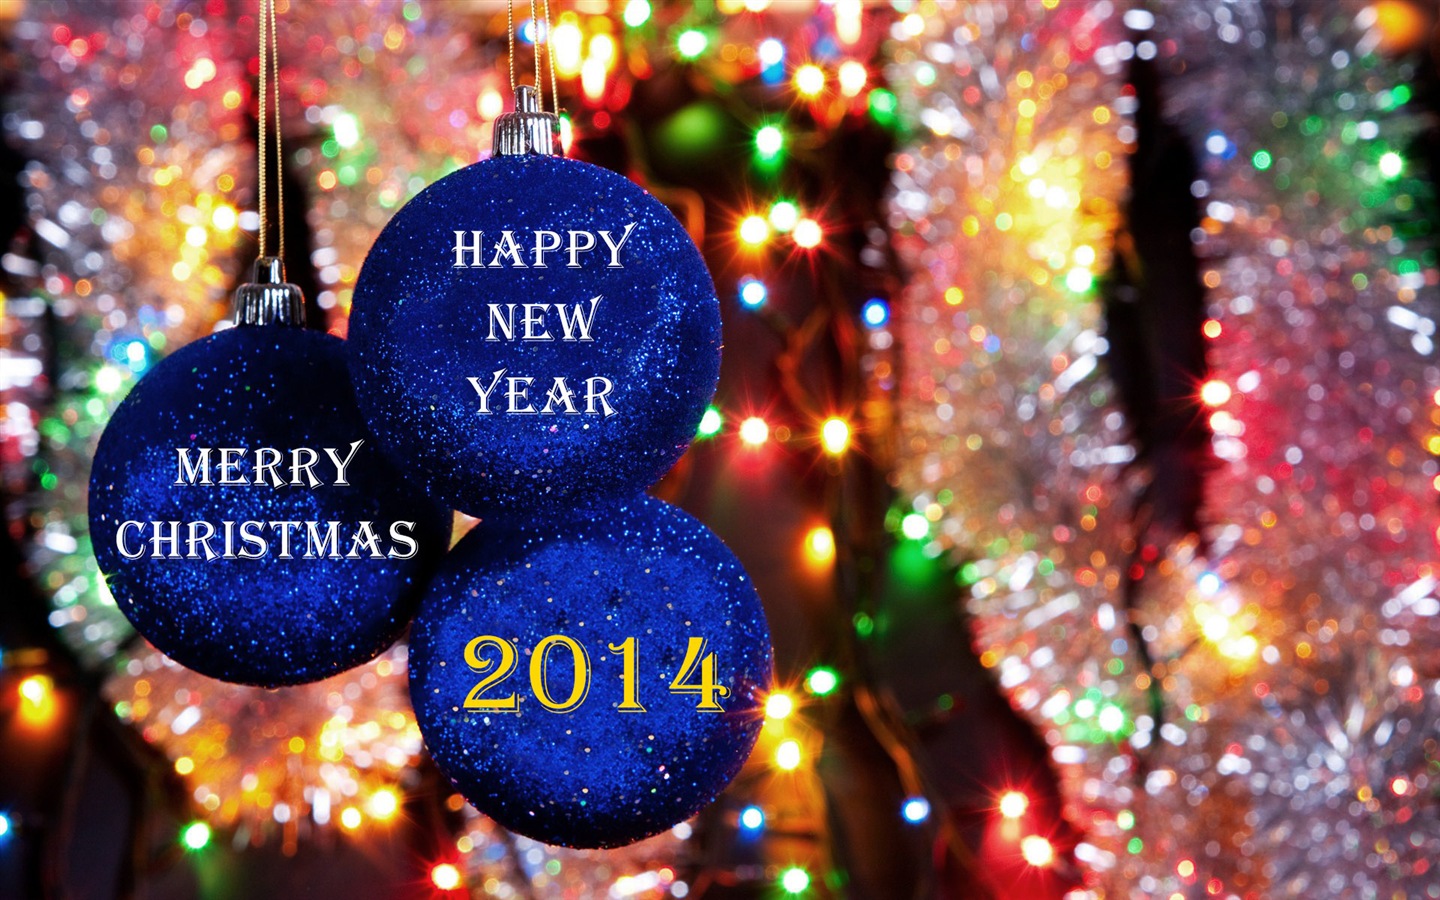 2014 New Year Theme HD Wallpapers (2) #6 - 1440x900